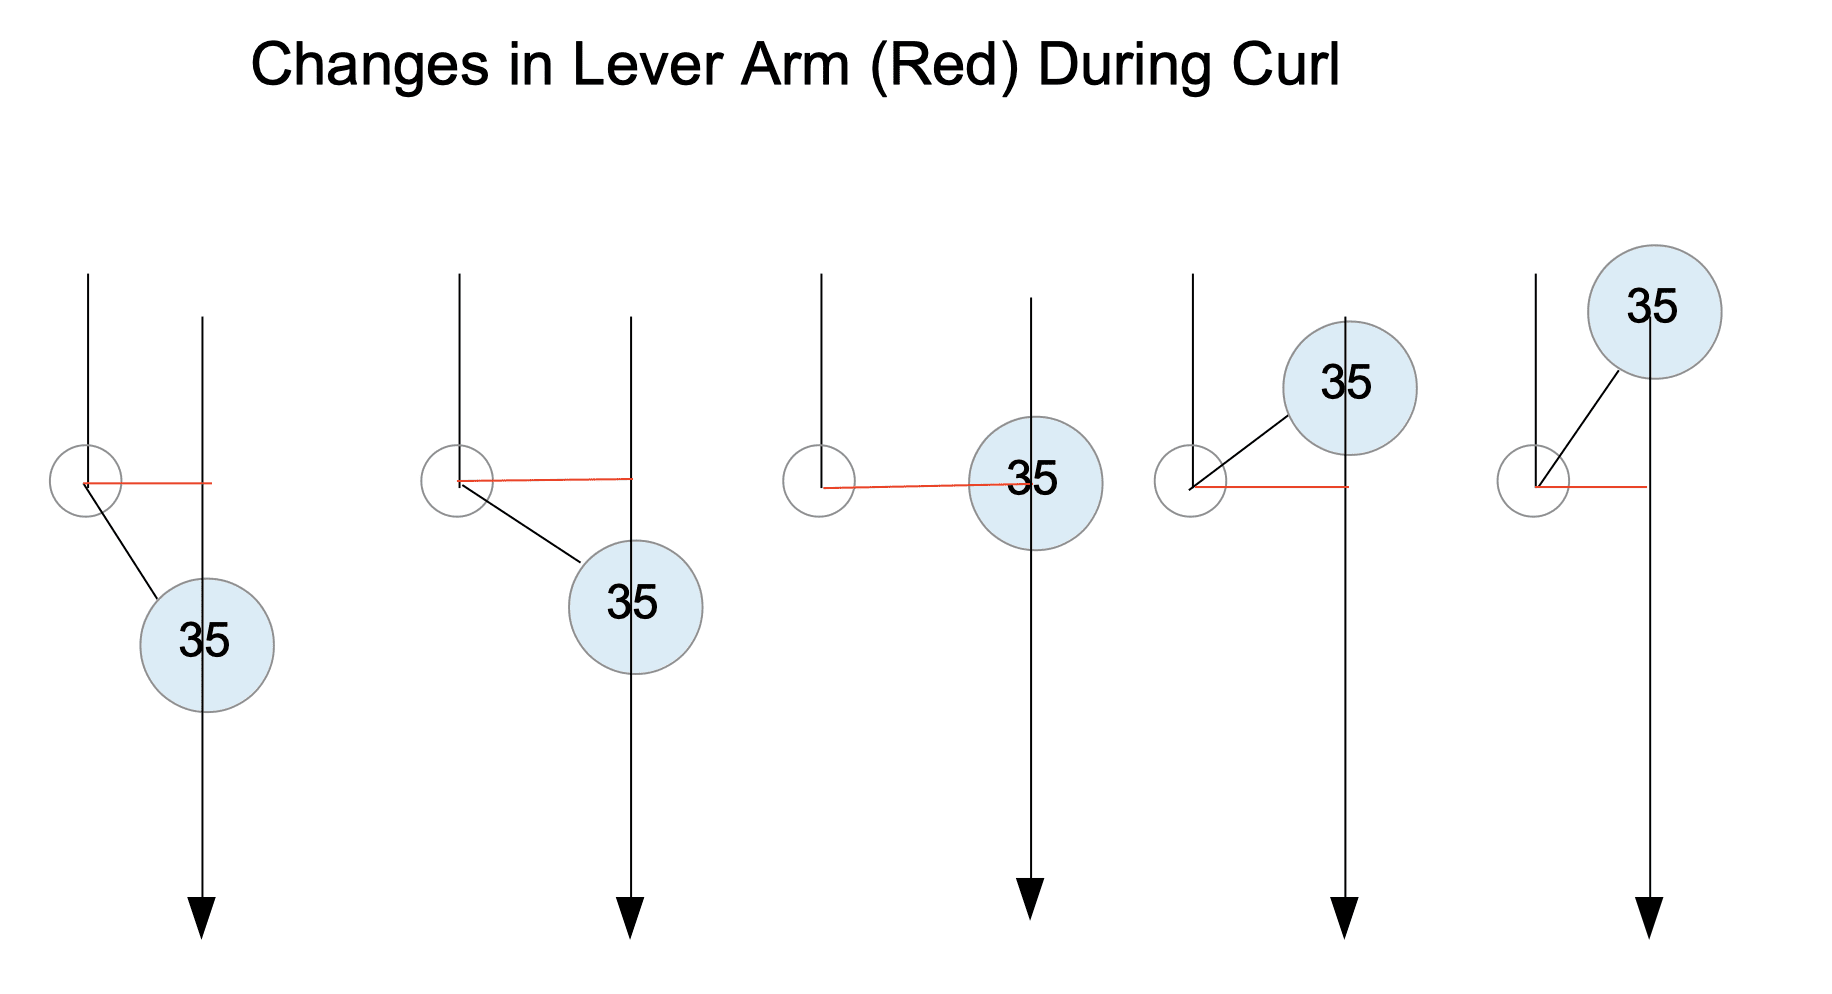 Changes in Lever Arm During Biceps Curl